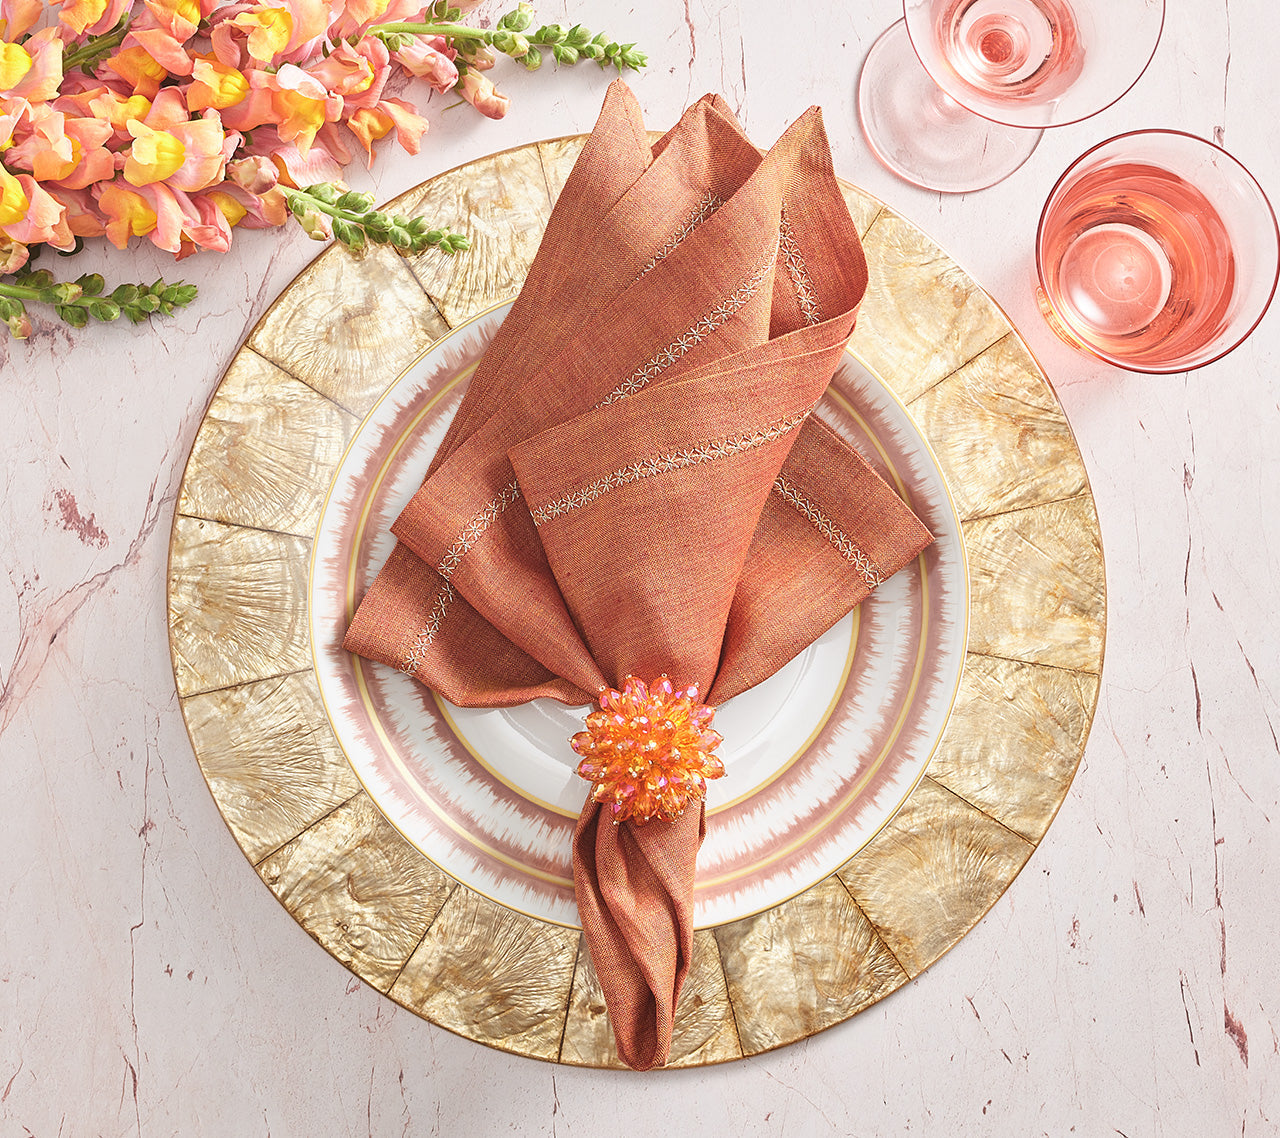 Round Capiz Placemat in Champagne